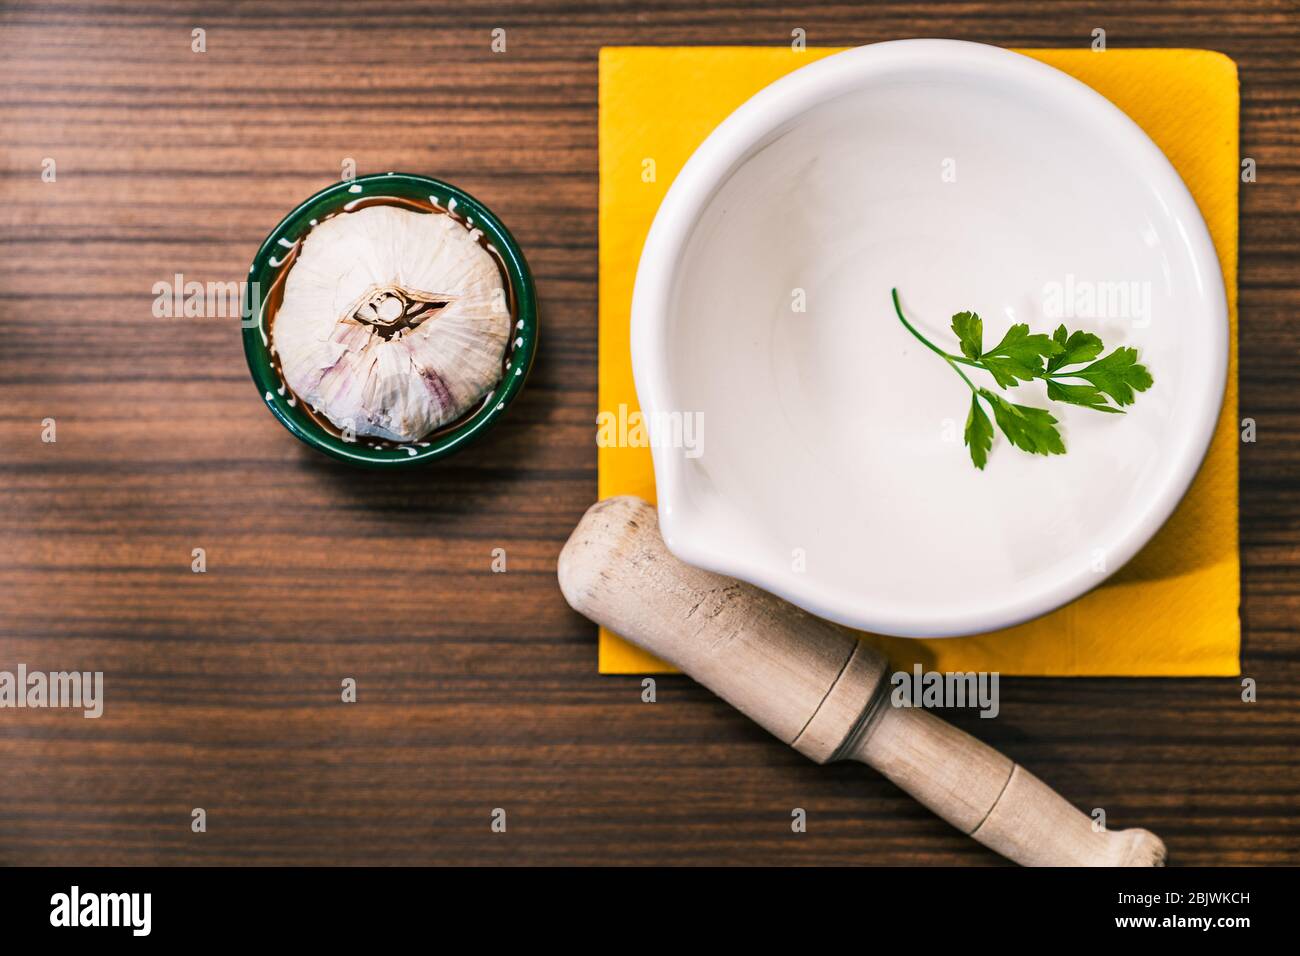 Preparing a recipe to make aioli in a traditional and homemade way. Ingredients and utensils to prepare garlic oil. Garlic head, parsley leaf and a mo Stock Photo